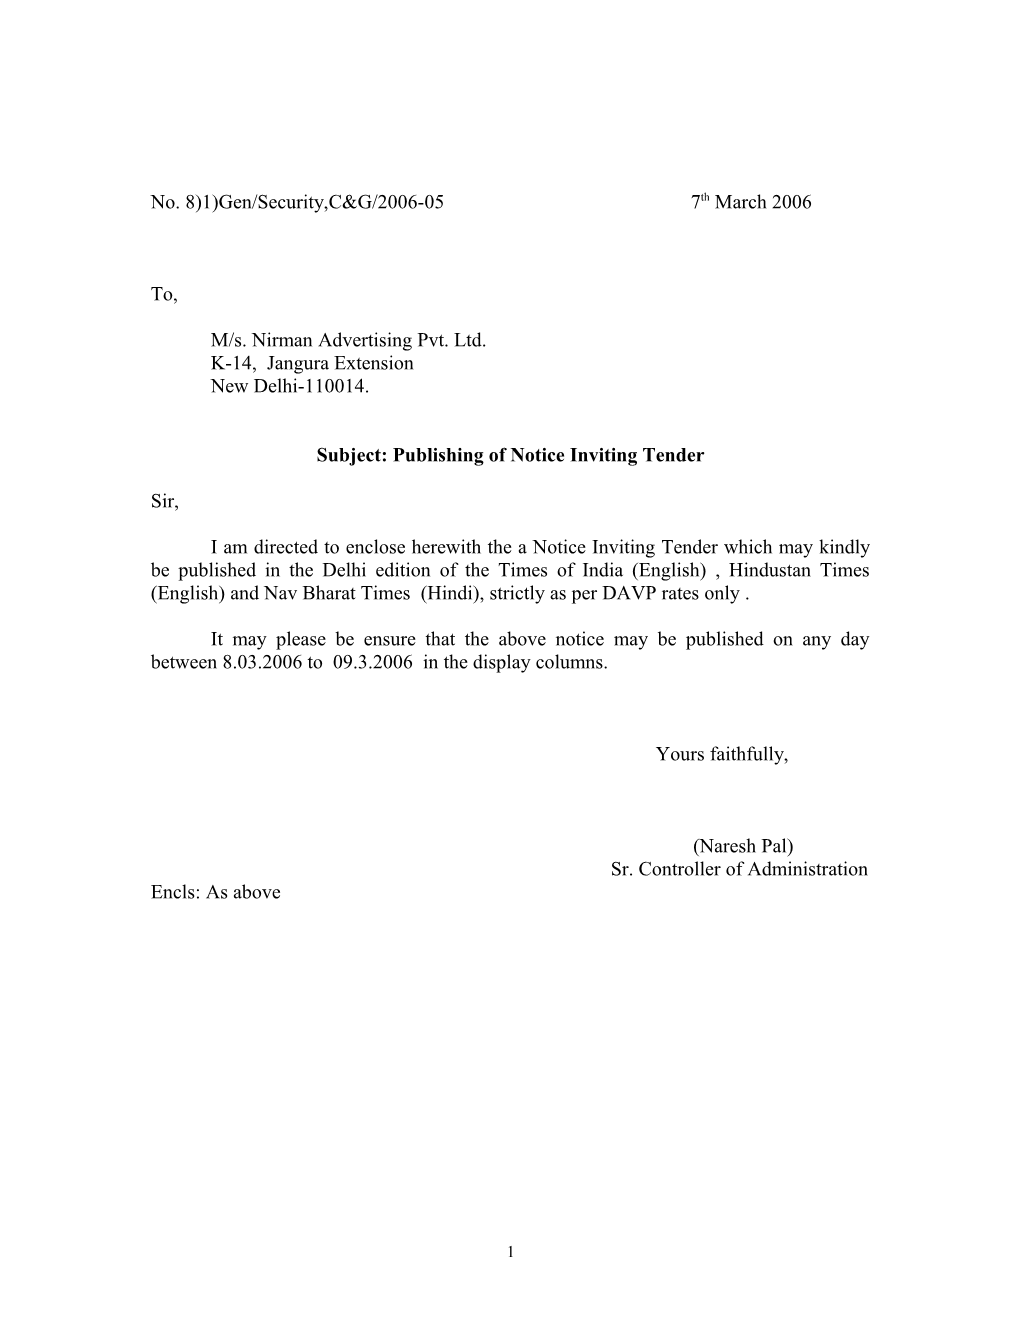 Subject: Publishing of Notice Inviting Tender